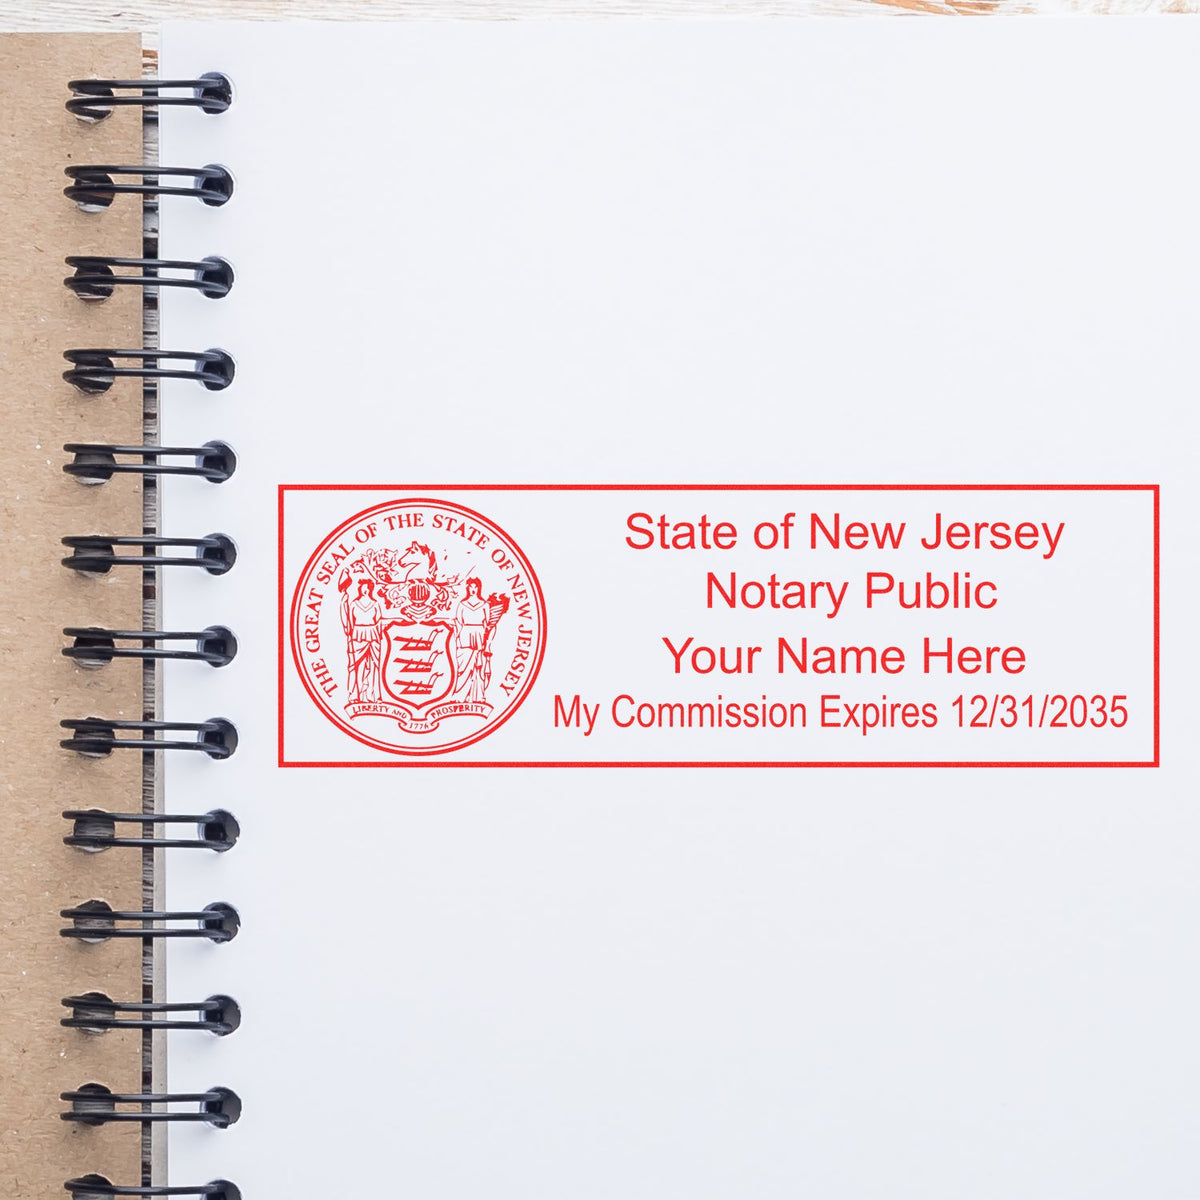 A stamped impression of the Wooden Handle New Jersey State Seal Notary Public Stamp in this stylish lifestyle photo, setting the tone for a unique and personalized product.